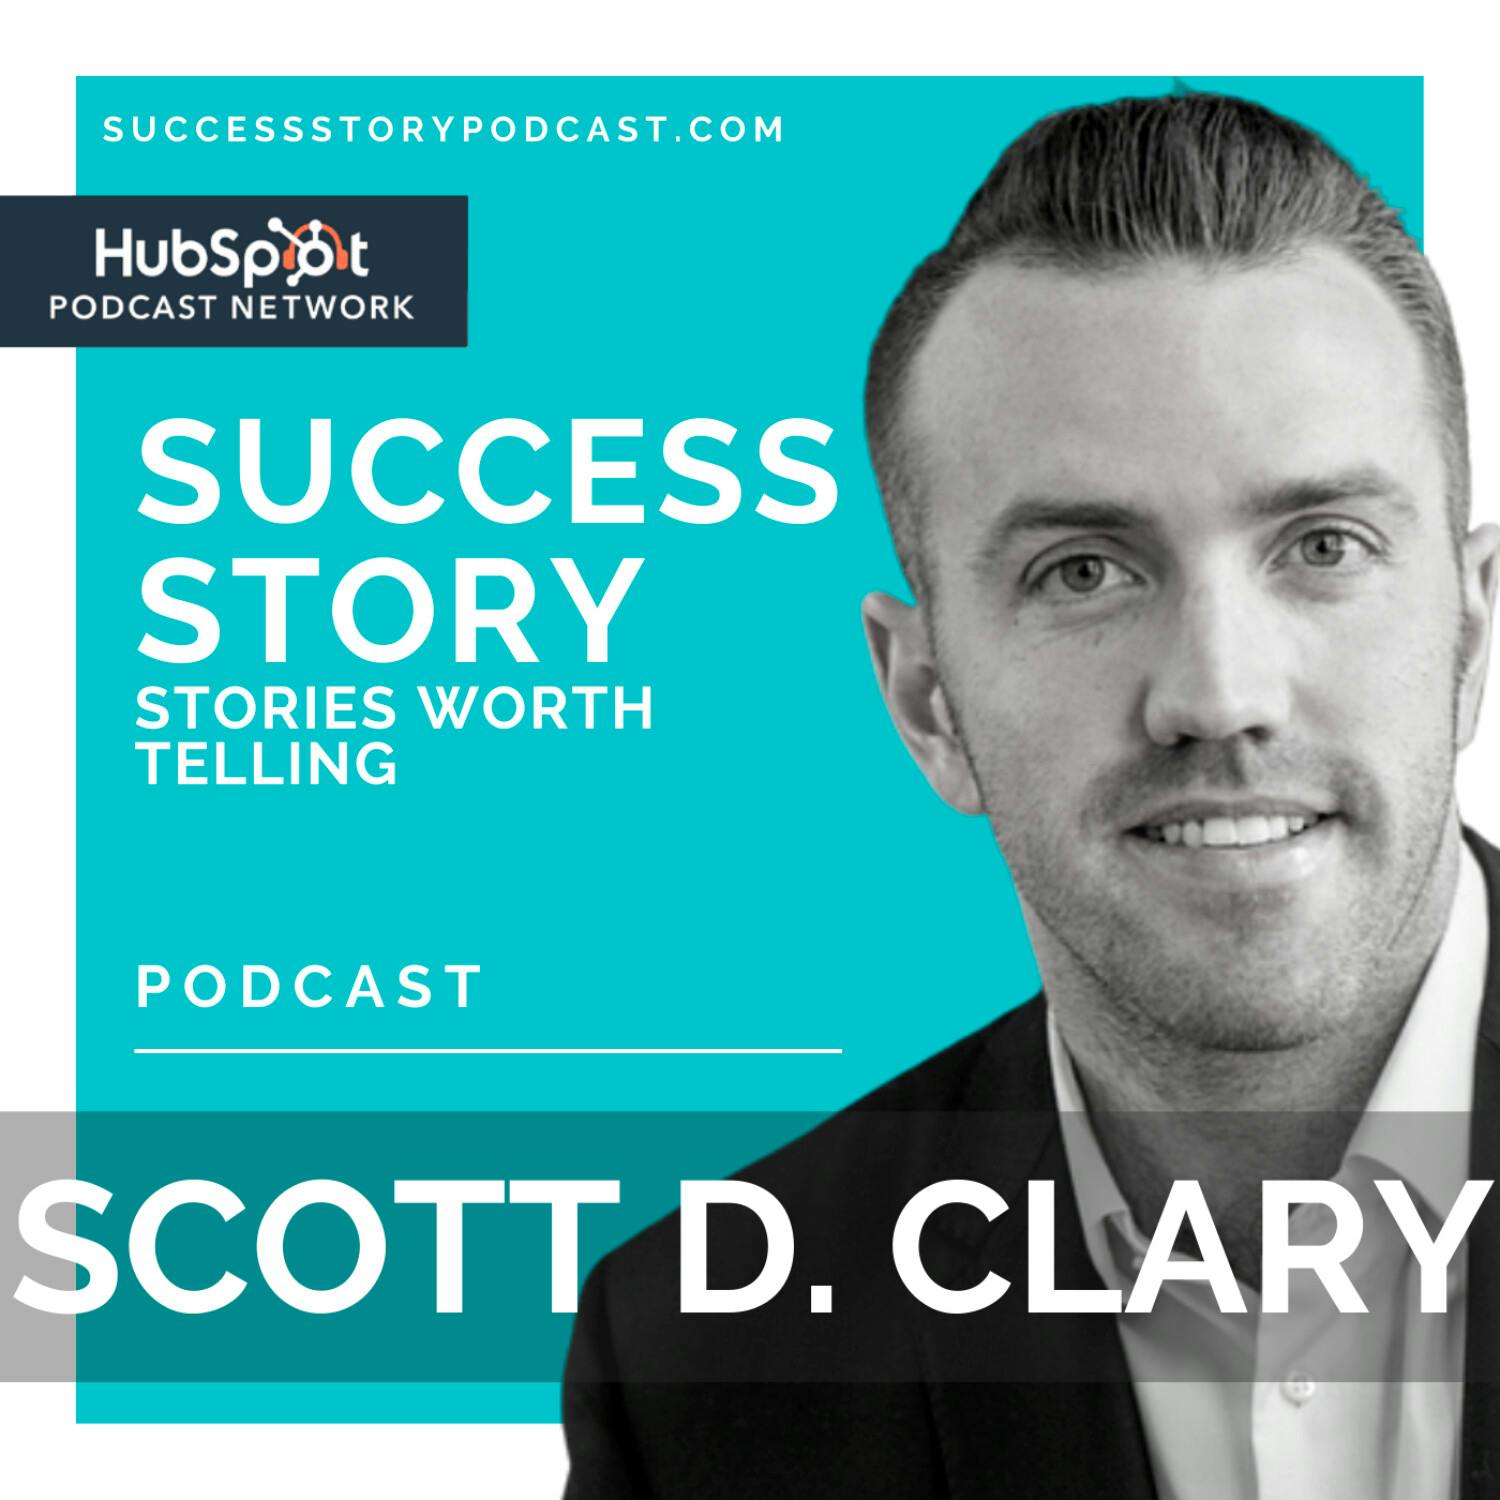 The Theranos Startup Story: From $9 Billion to $0 With Criminal Charges #scottsthoughts